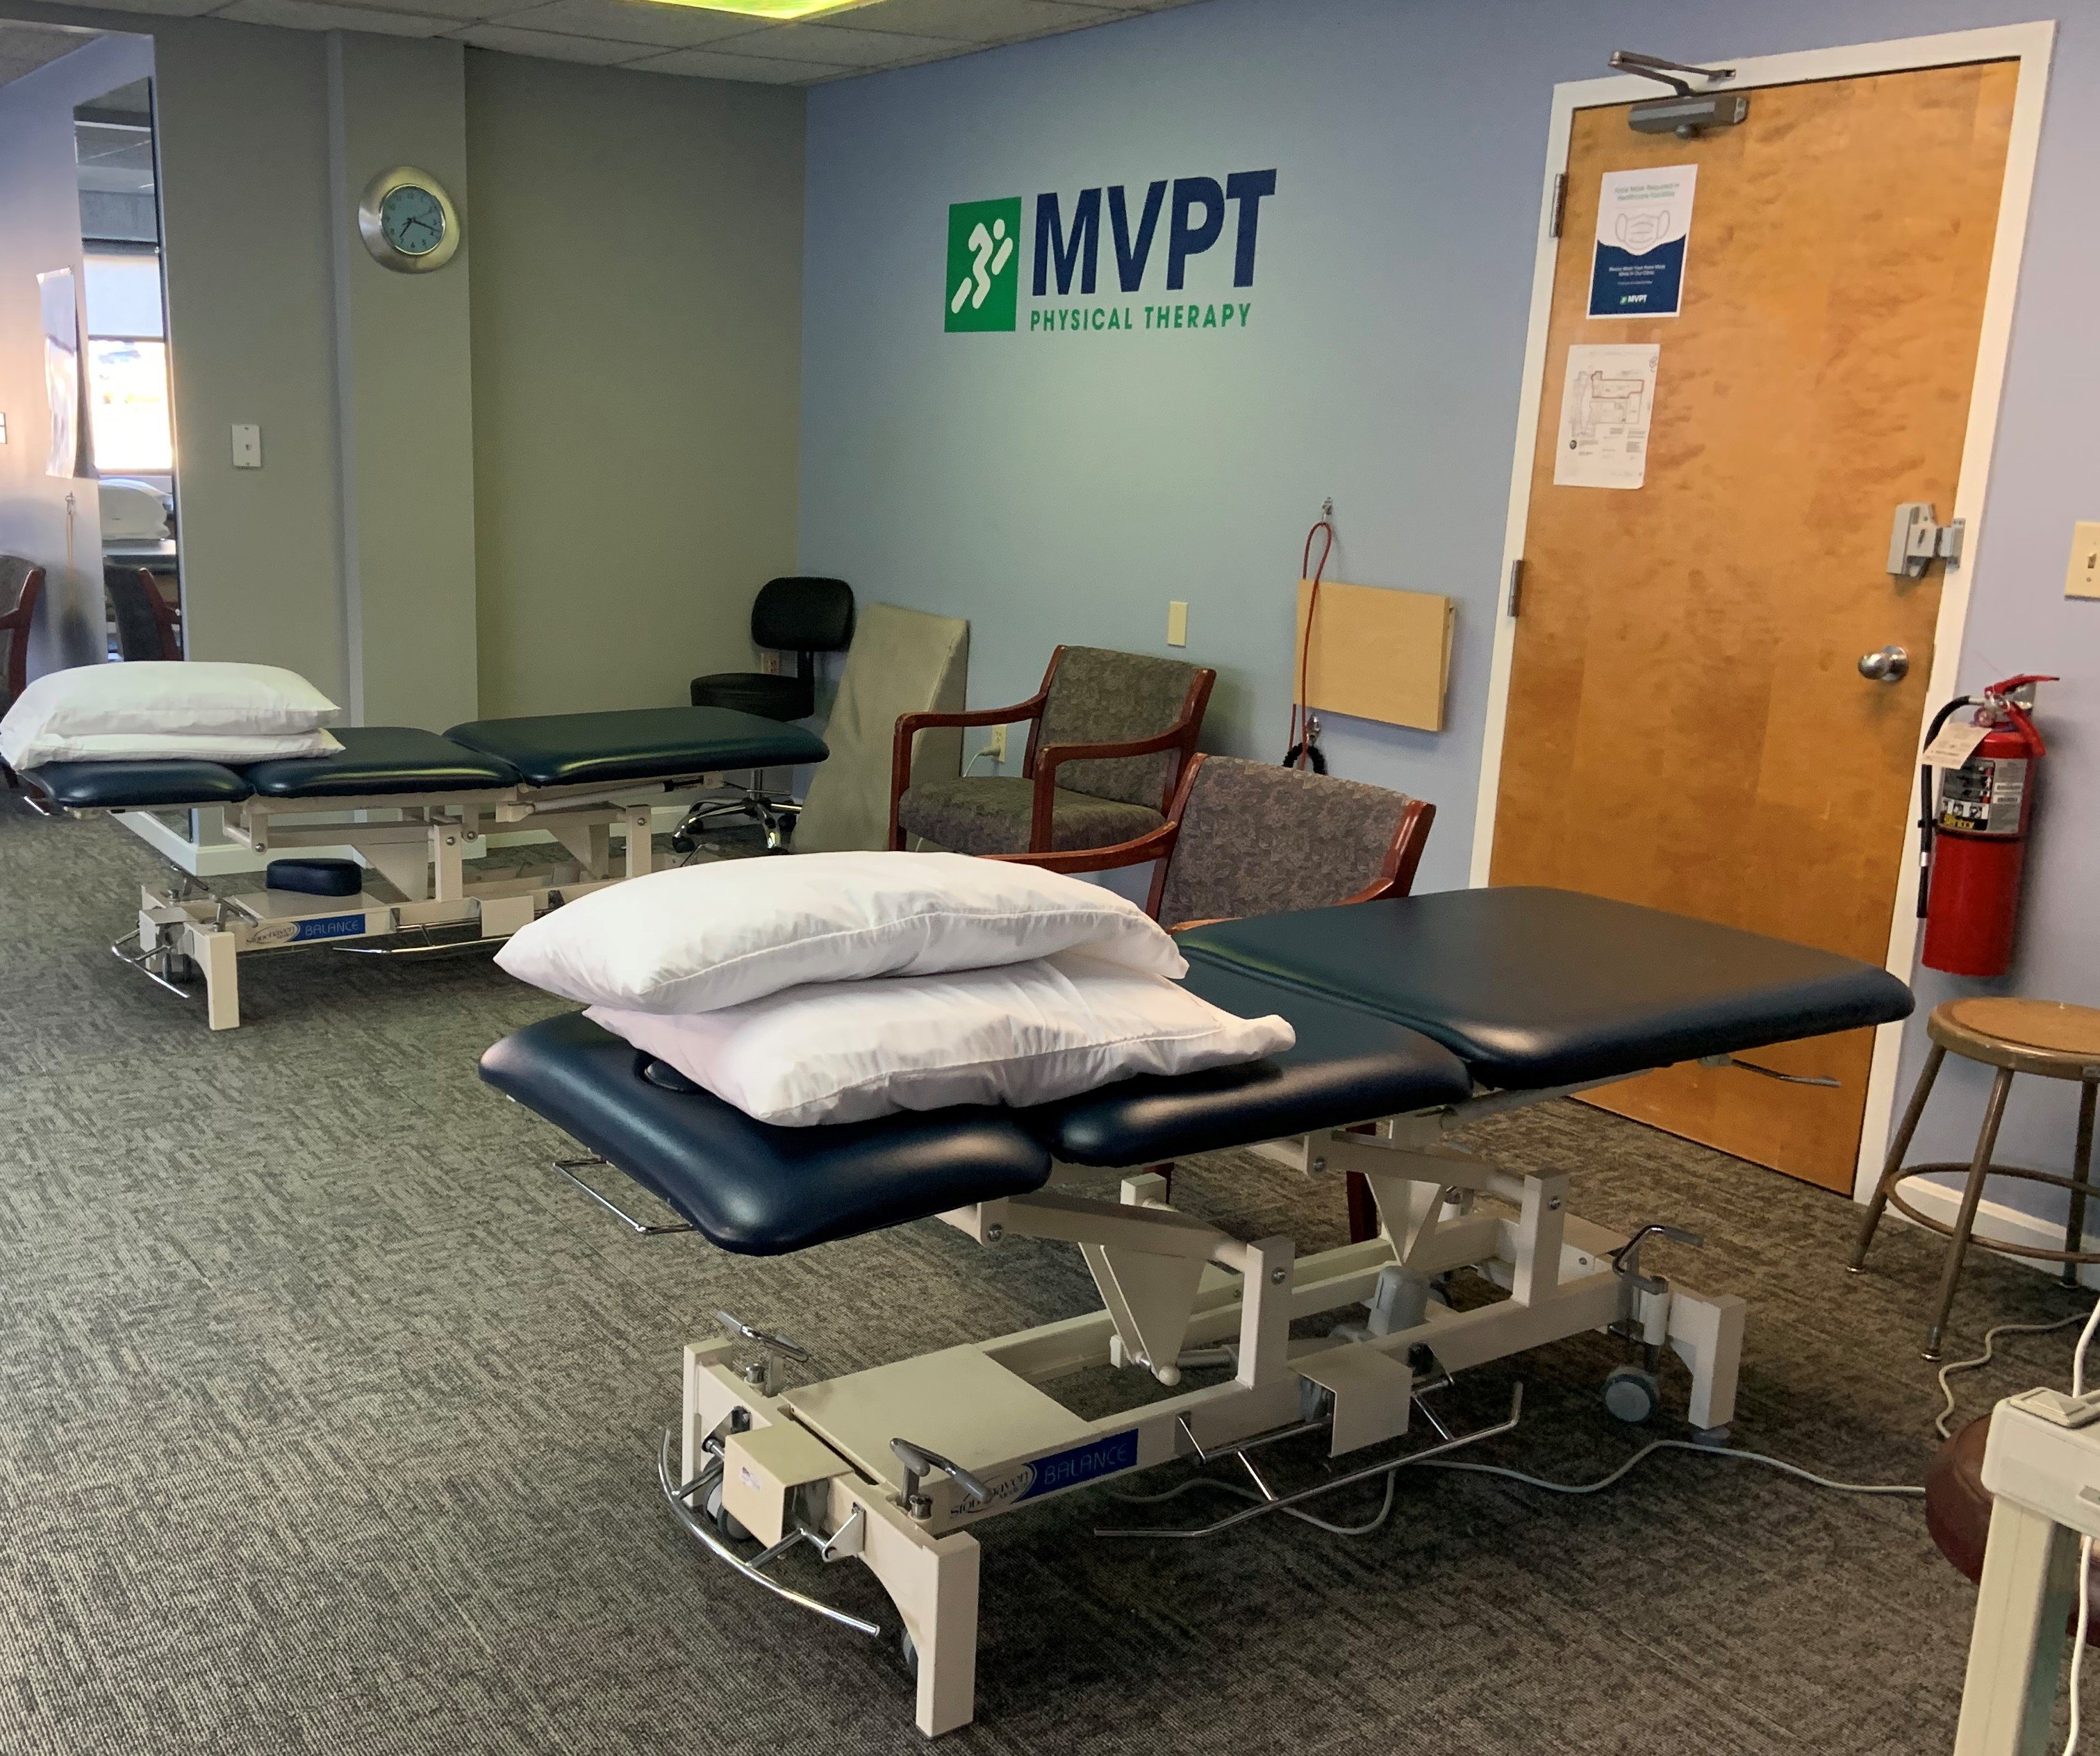 Electrical Stimulation Bedford, Manchester, derry, Nashua, NH - MVPT